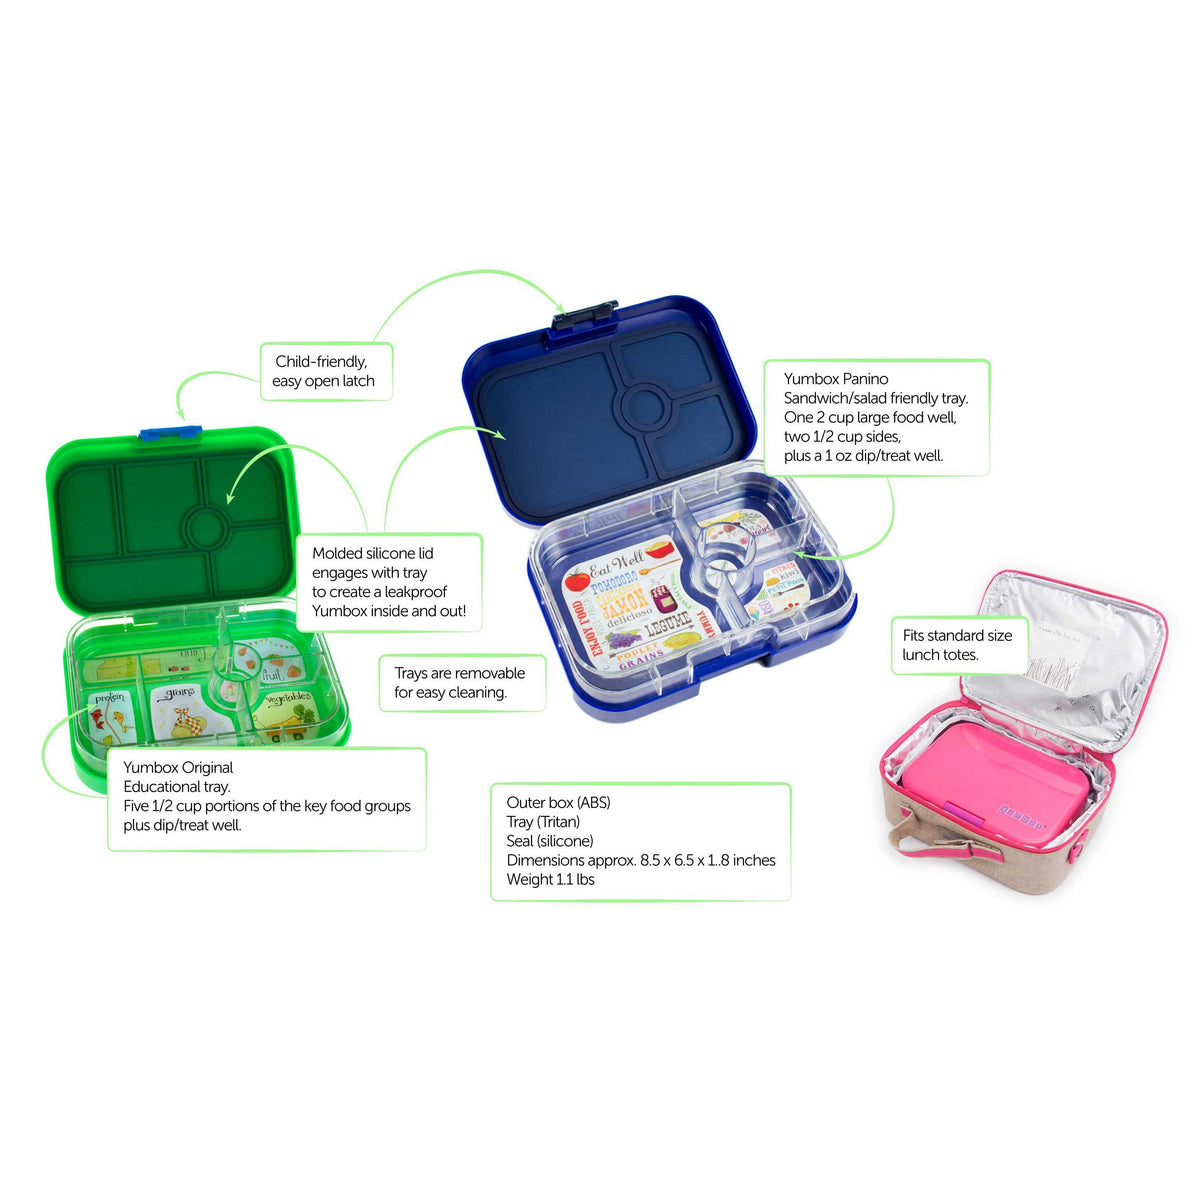 yumbox-original-with-rocket-tray-terra-green-6-compartment-lunch-box- (5)